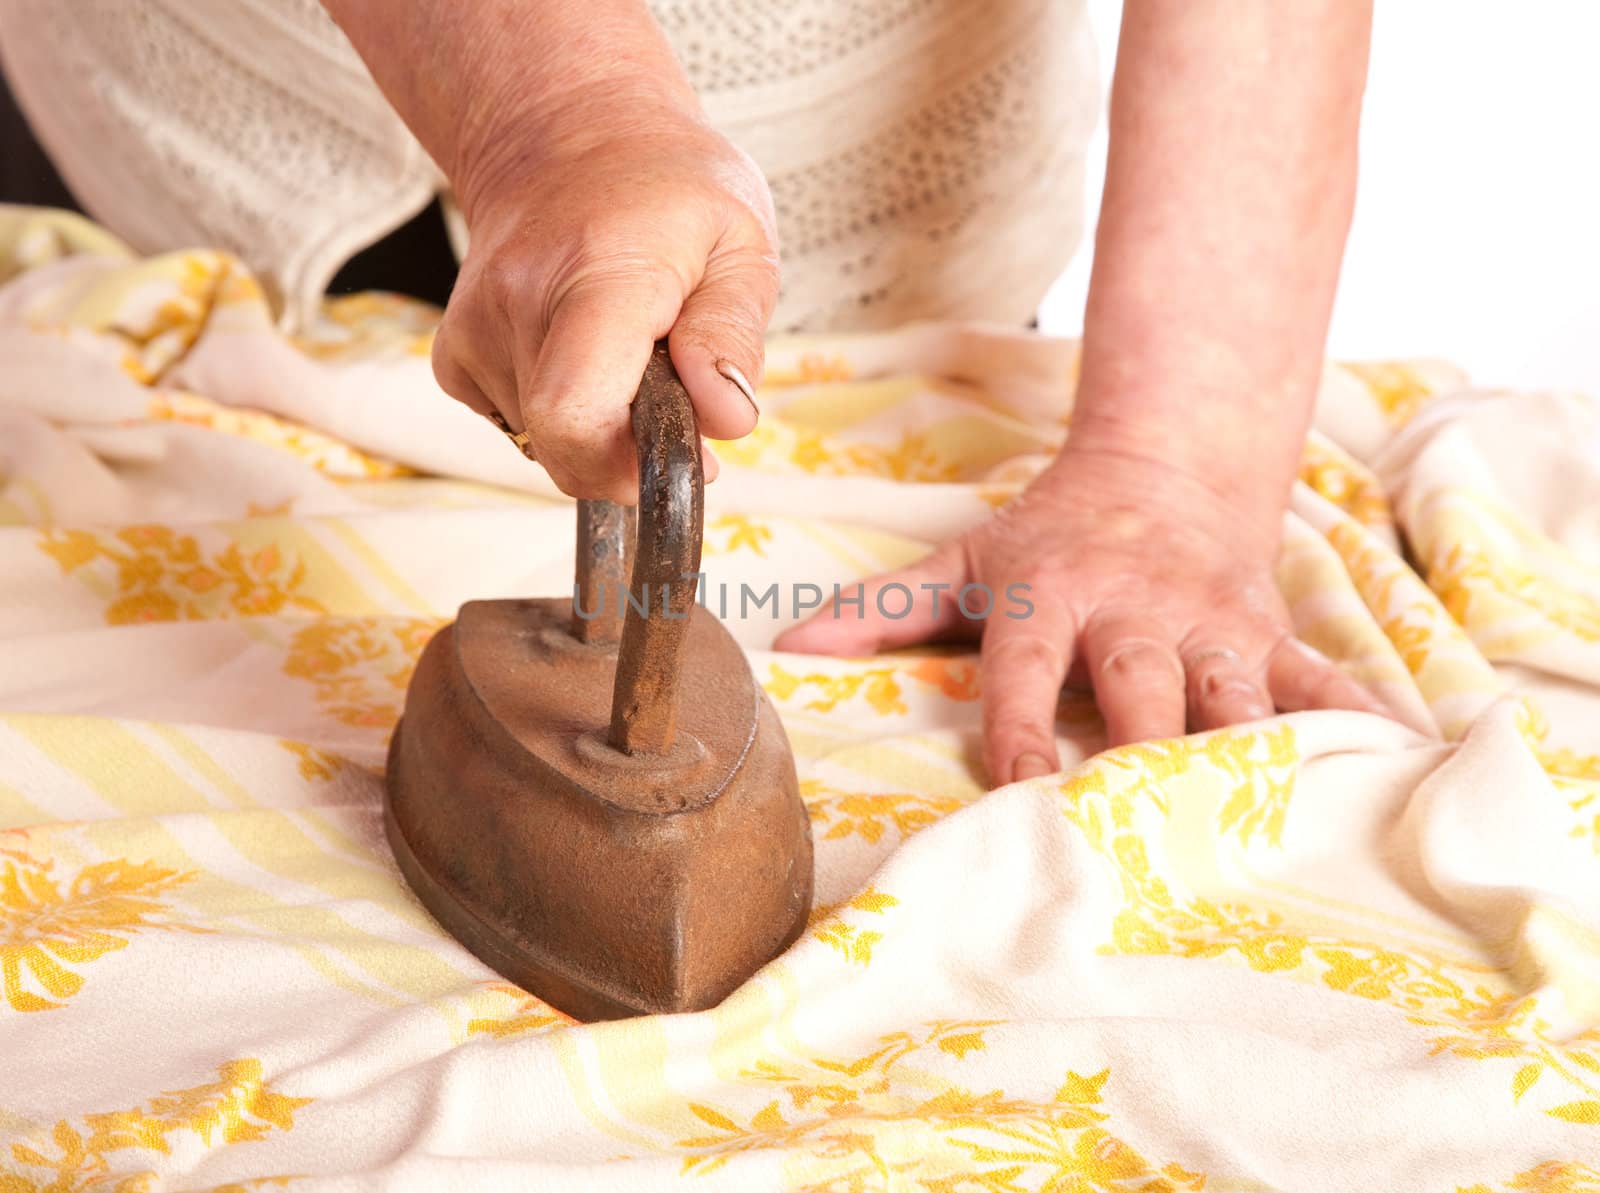 The old woman irons a cloth an ancient iron